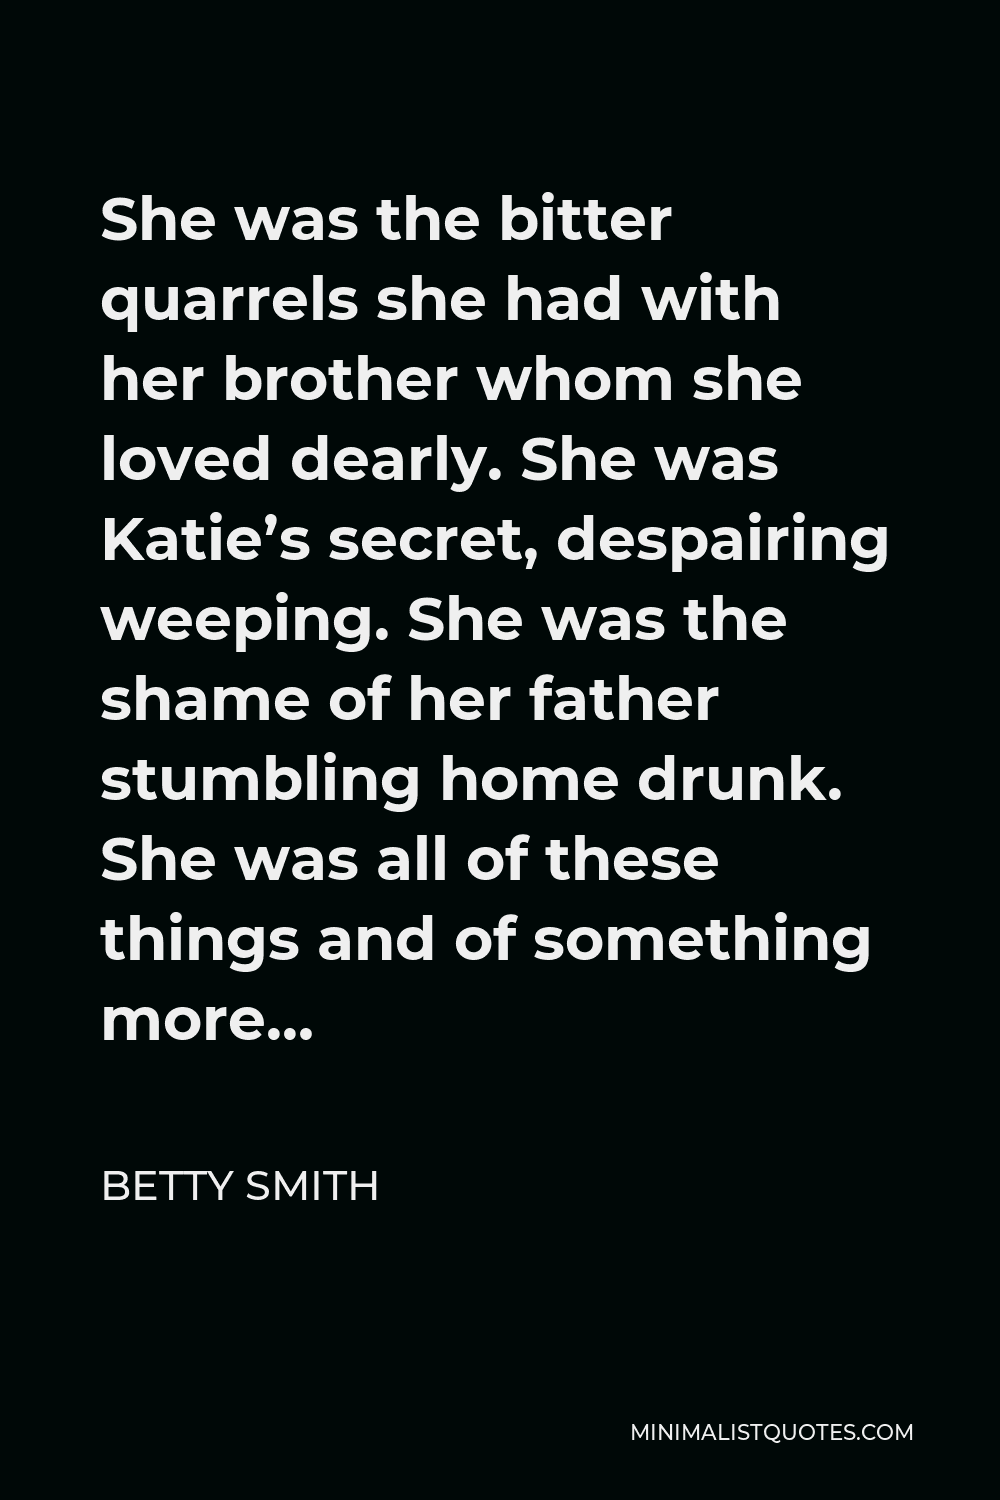 Betty Smith Quote - She was the bitter quarrels she had with her brother whom she loved dearly. She was Katie’s secret, despairing weeping. She was the shame of her father stumbling home drunk. She was all of these things and of something more…